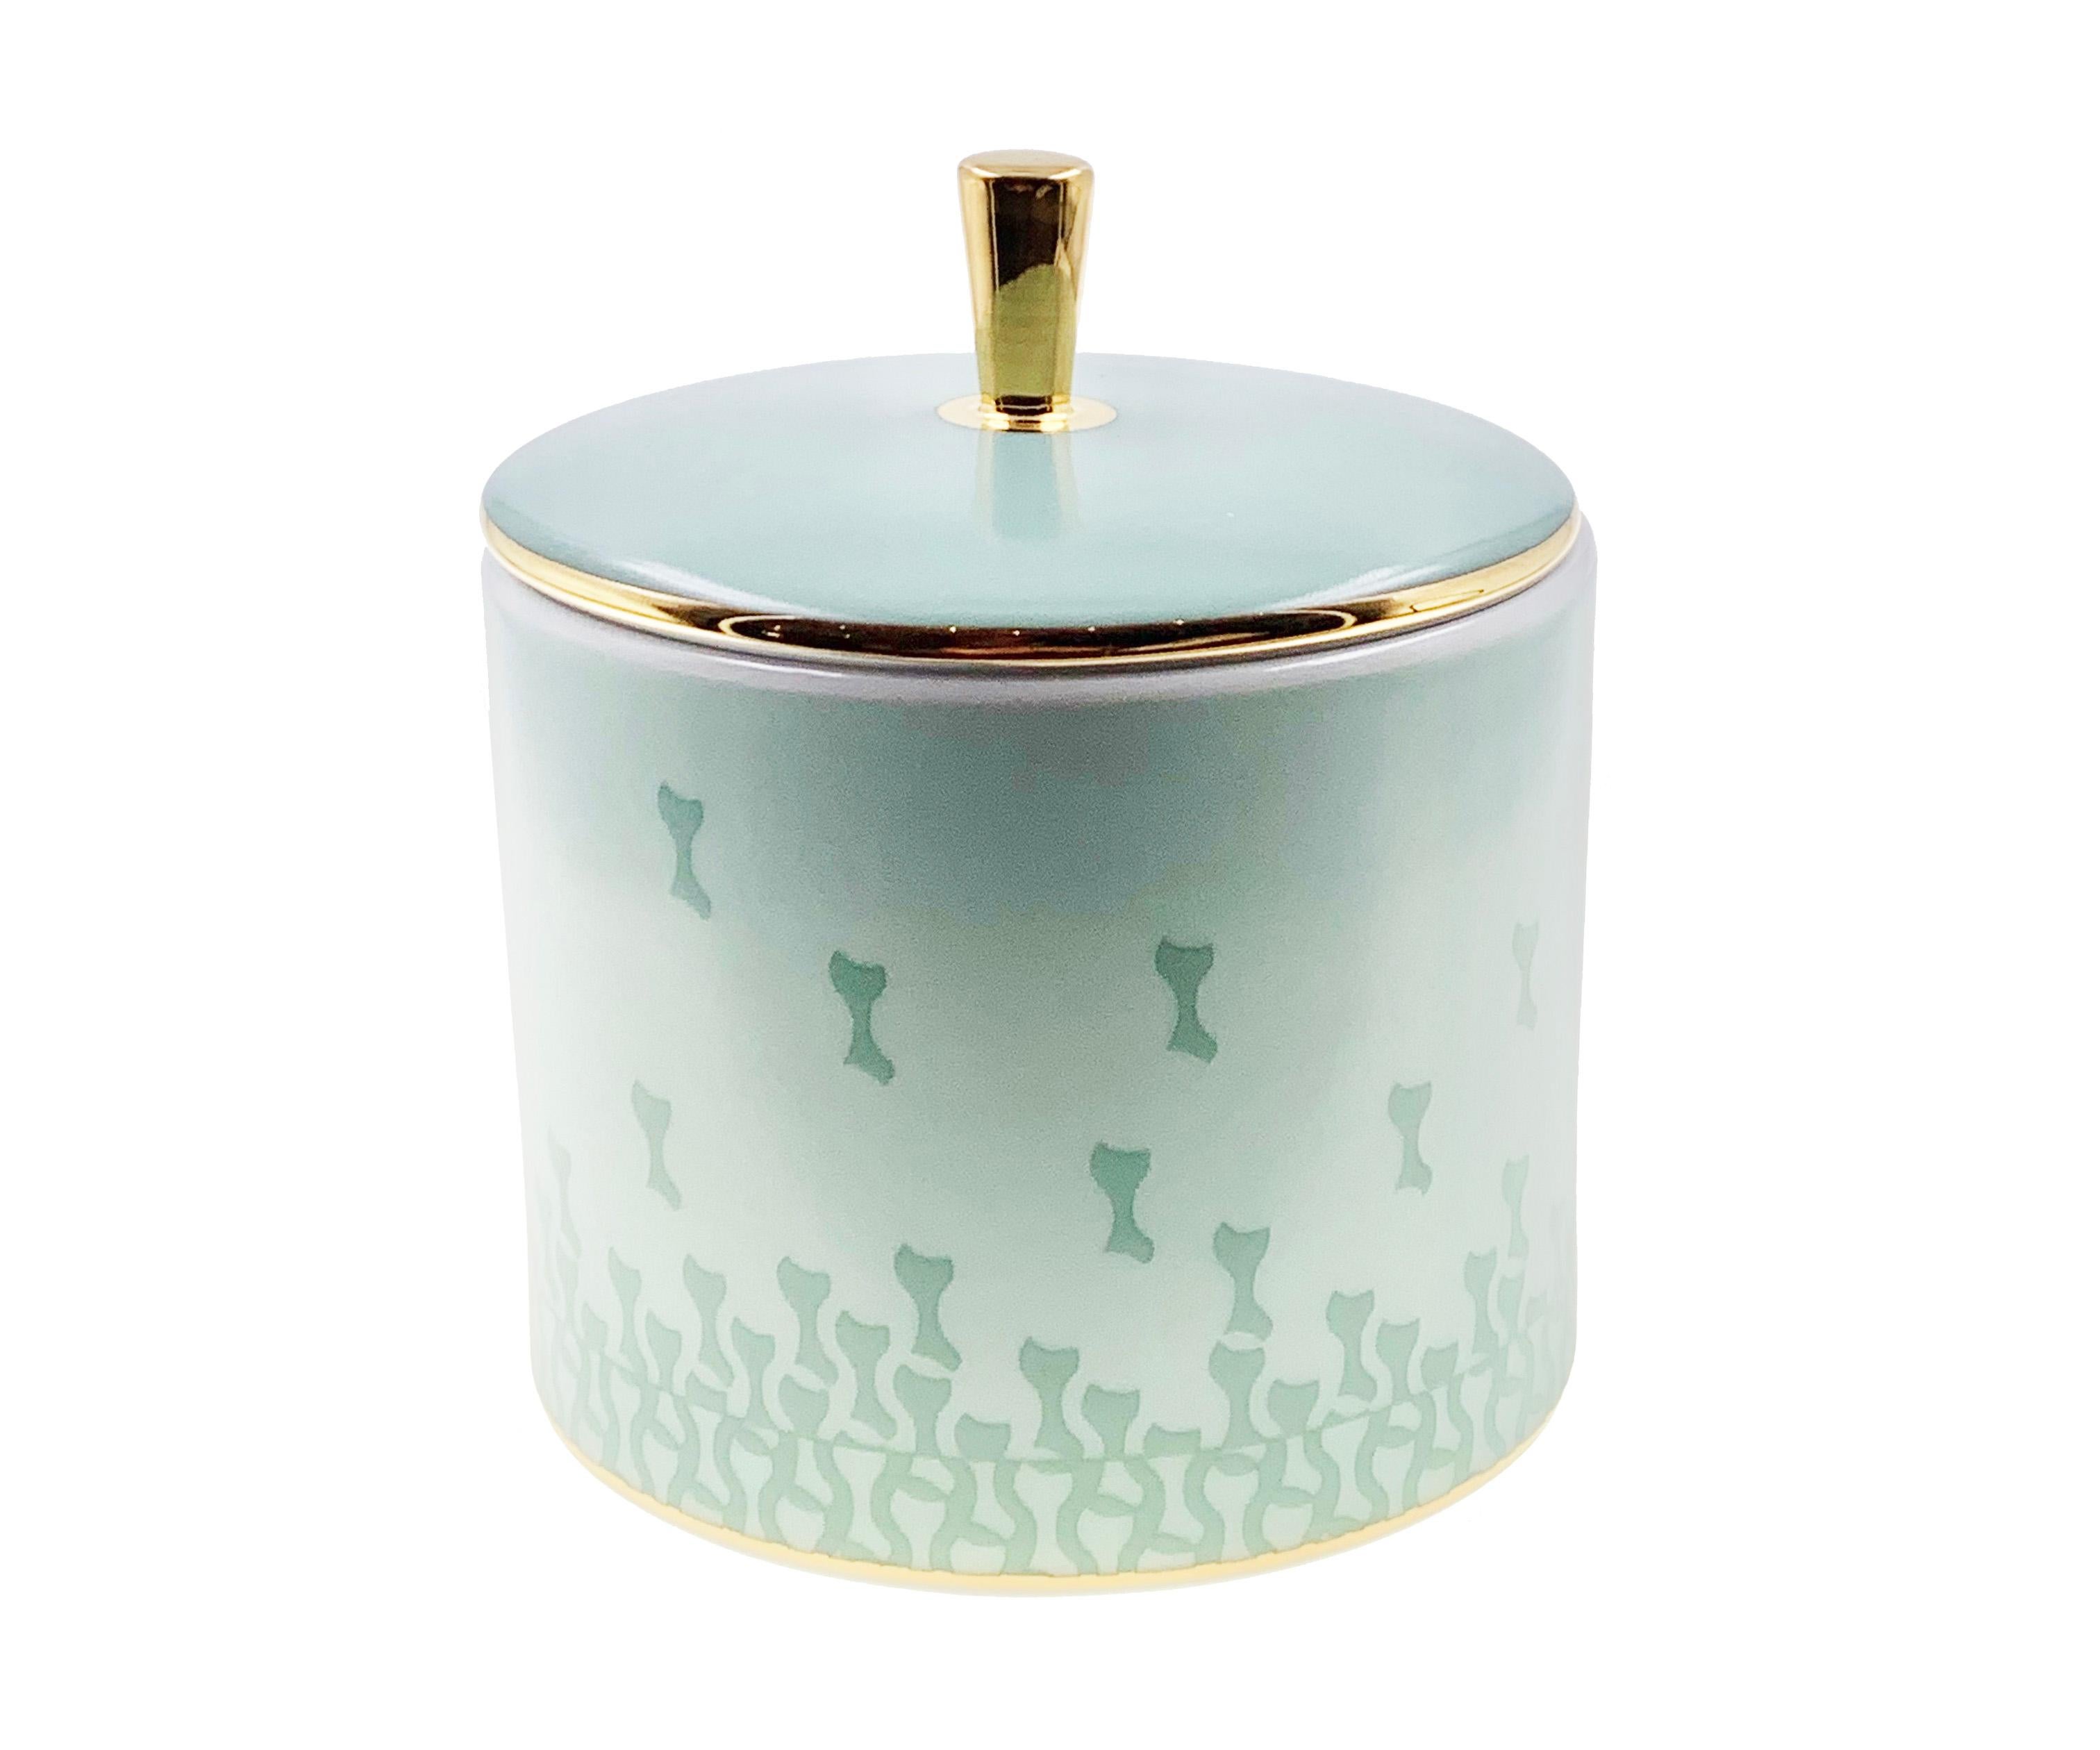 Larger quantities available upon request, with 8 weeks production time.

Description: Cylindrical box with lid (2 pieces)
Color: Sage green
Size: 8.5Ø x 7H cm, 80 ml
Material: Porcelain and gold
Collection: Mid Century Rhythm